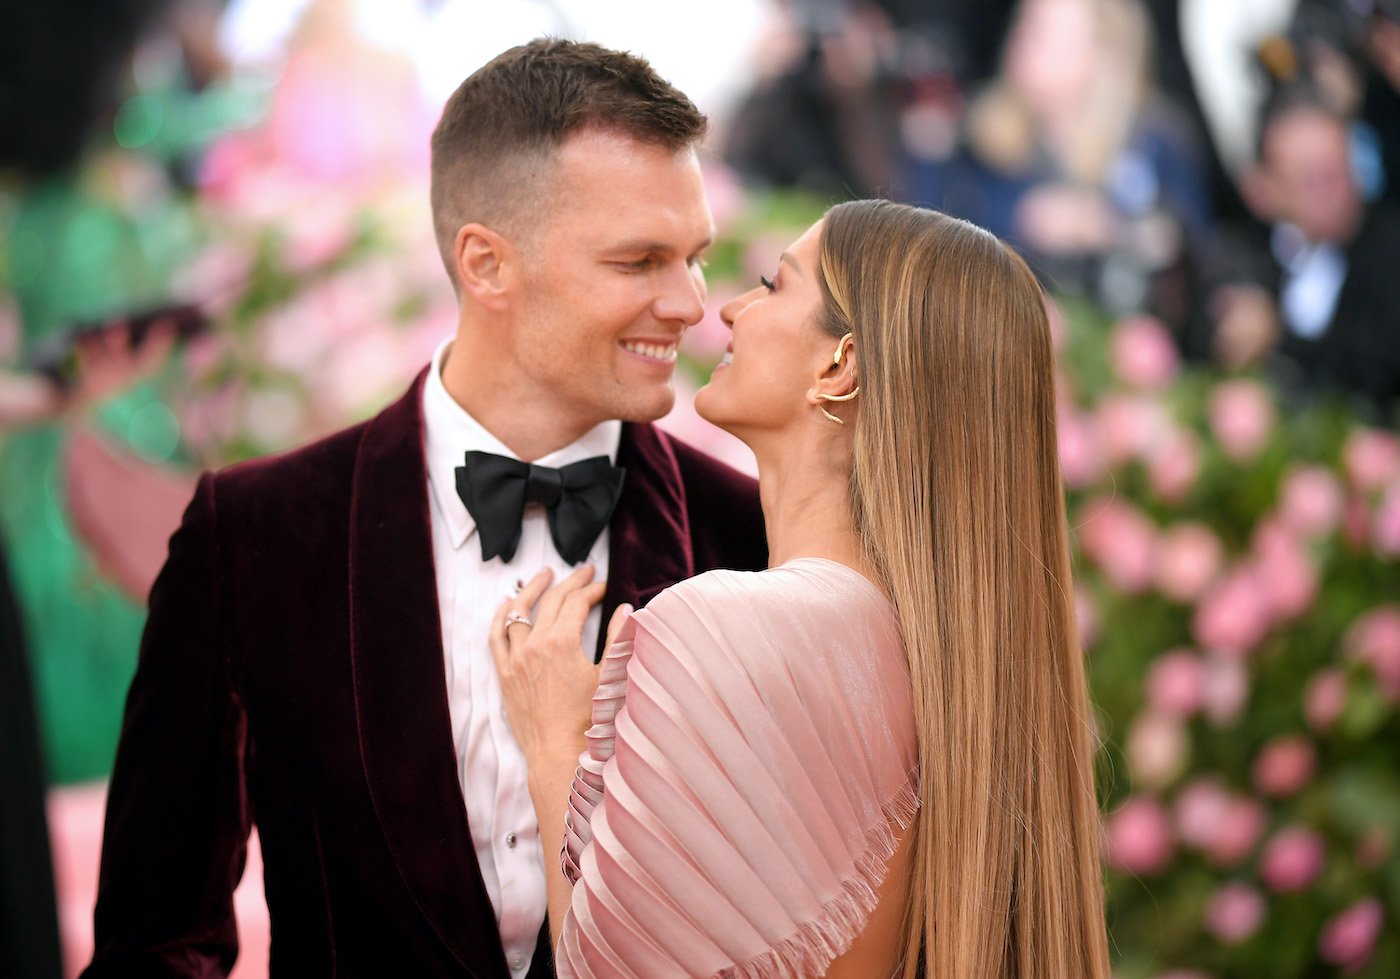 Tom Brady and Gisele Bundchen gaze into each other's eyes at the 2019 Met Gala